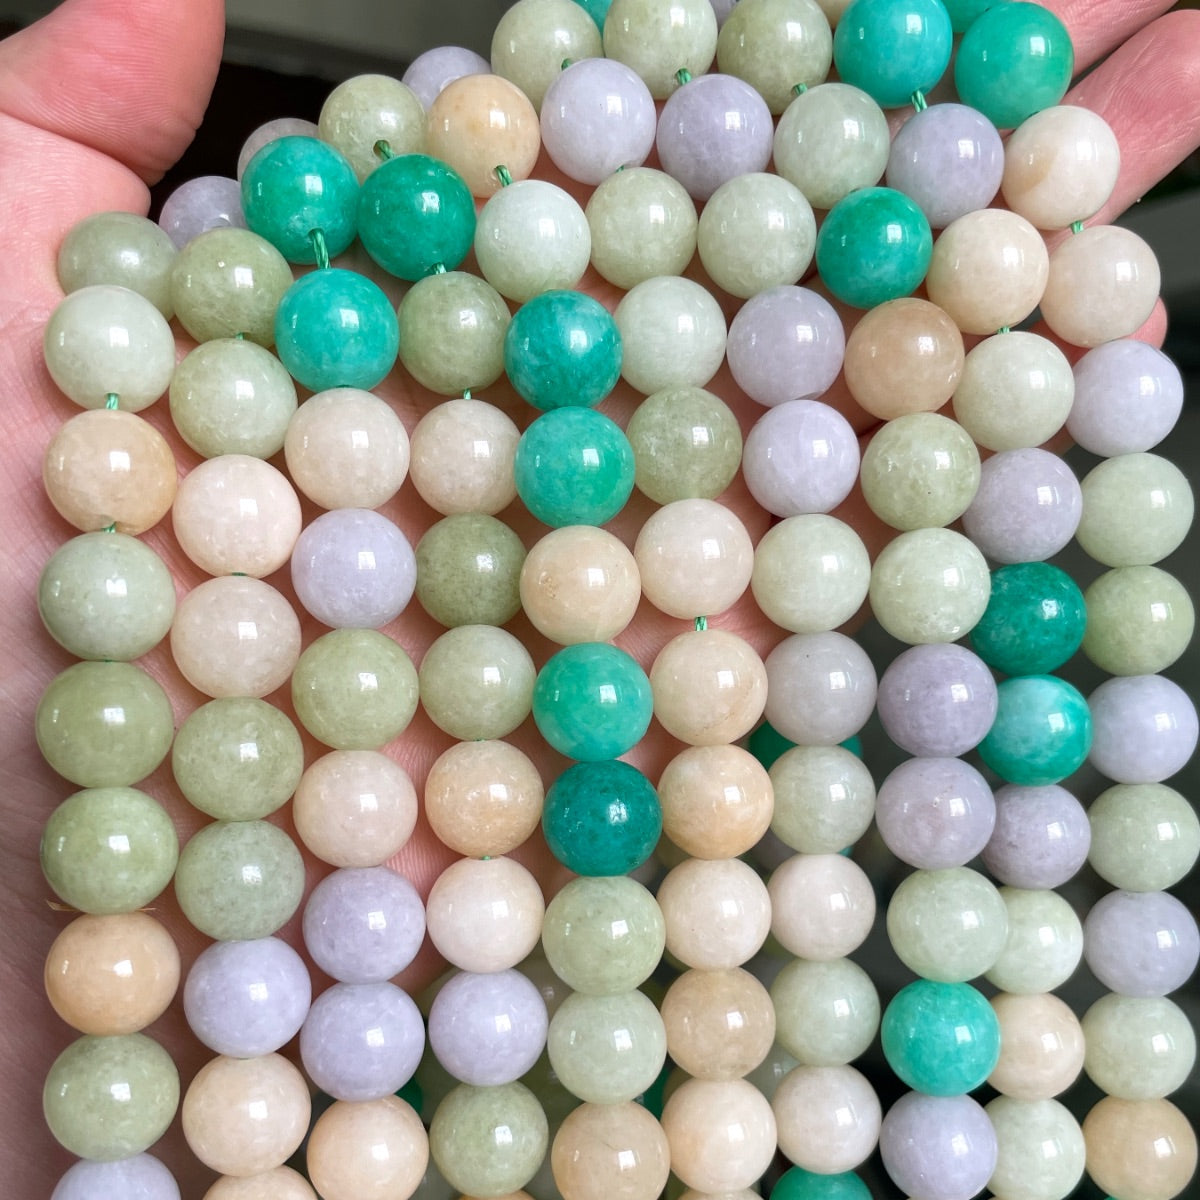 2 Strands/lot 10/12mm Multicolor Light Yellow Gray Green Turquoise Chalcedony Jade Round Stone Beads Stone Beads 12mm Stone Beads New Beads Arrivals Other Stone Beads Charms Beads Beyond